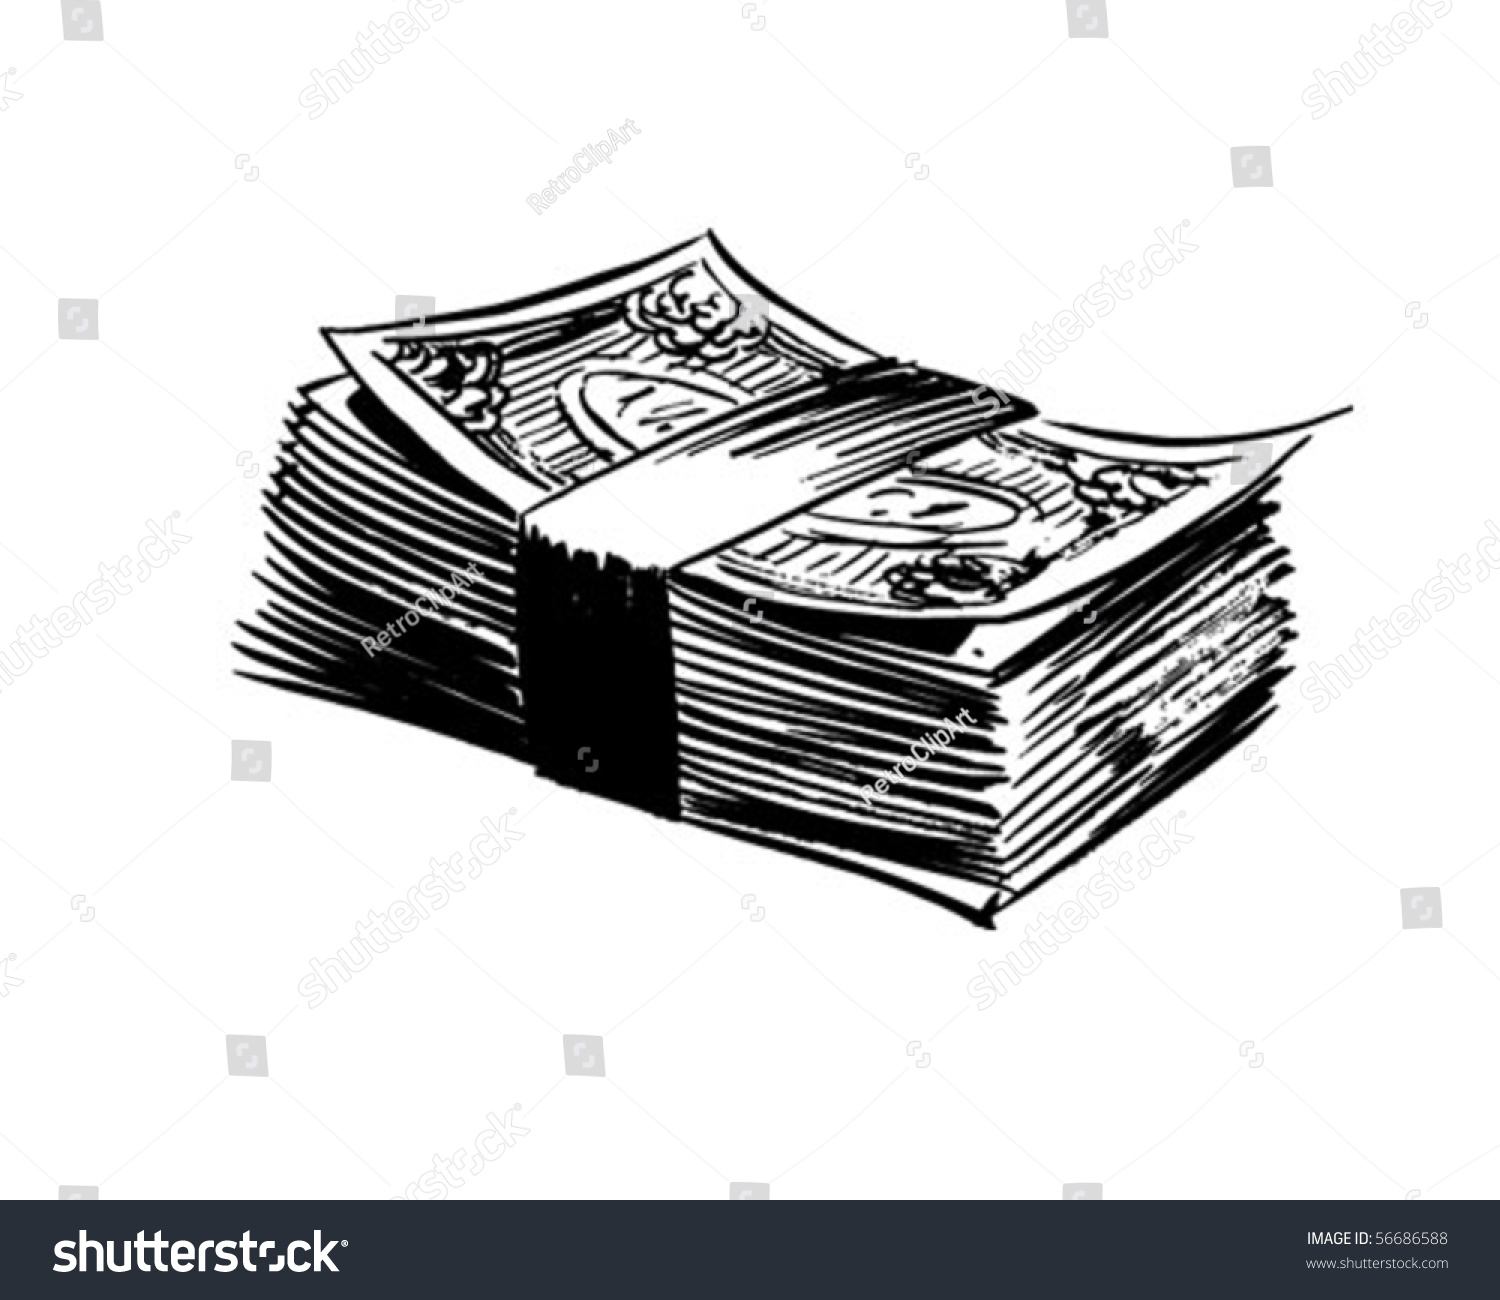 stack of money clipart - photo #37